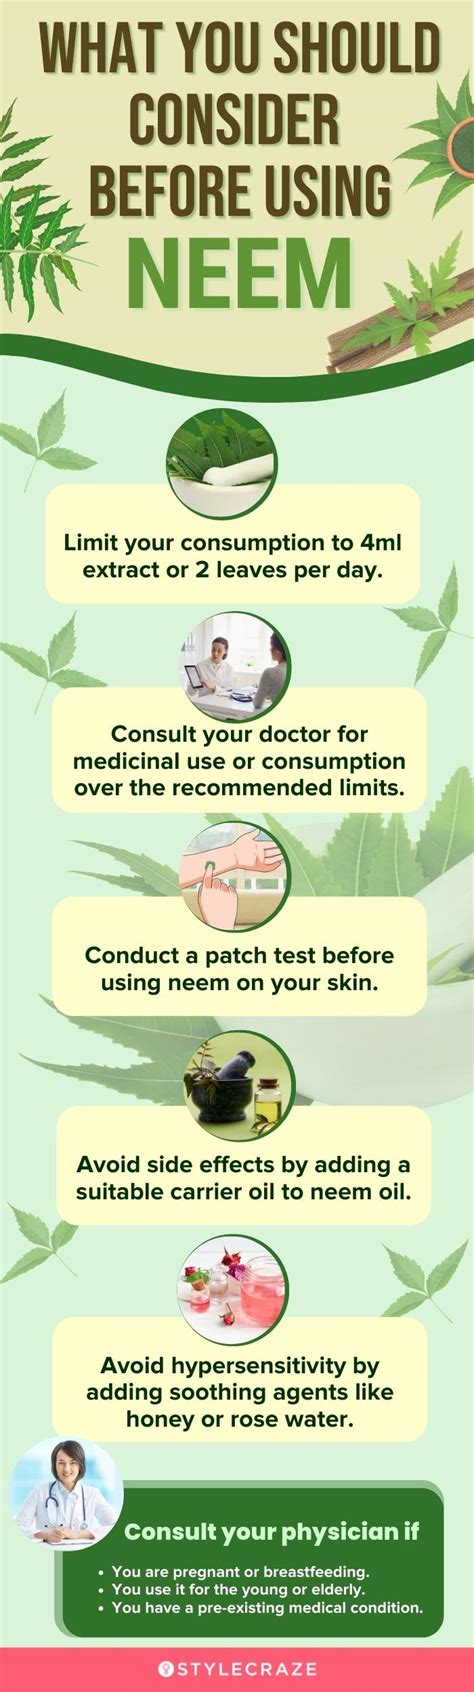 Does neem have side effects on skin?